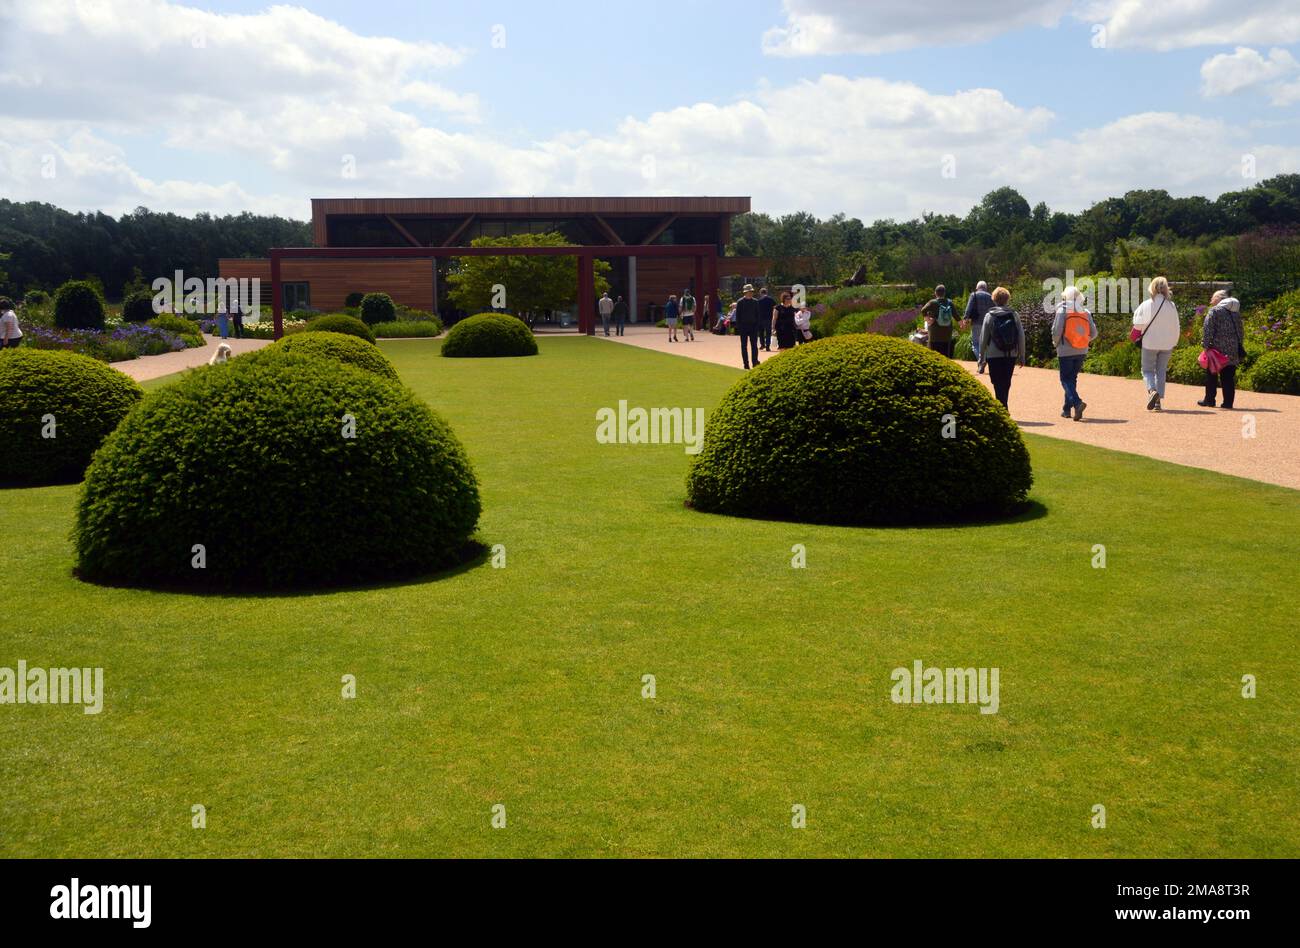 People Walking by Clipped Yew Tree Domes on the Lawn Next to the Welcome Garden & Building at RHS Garden Bridgewater, Worsley, Greater Manchester, UK. Stock Photo